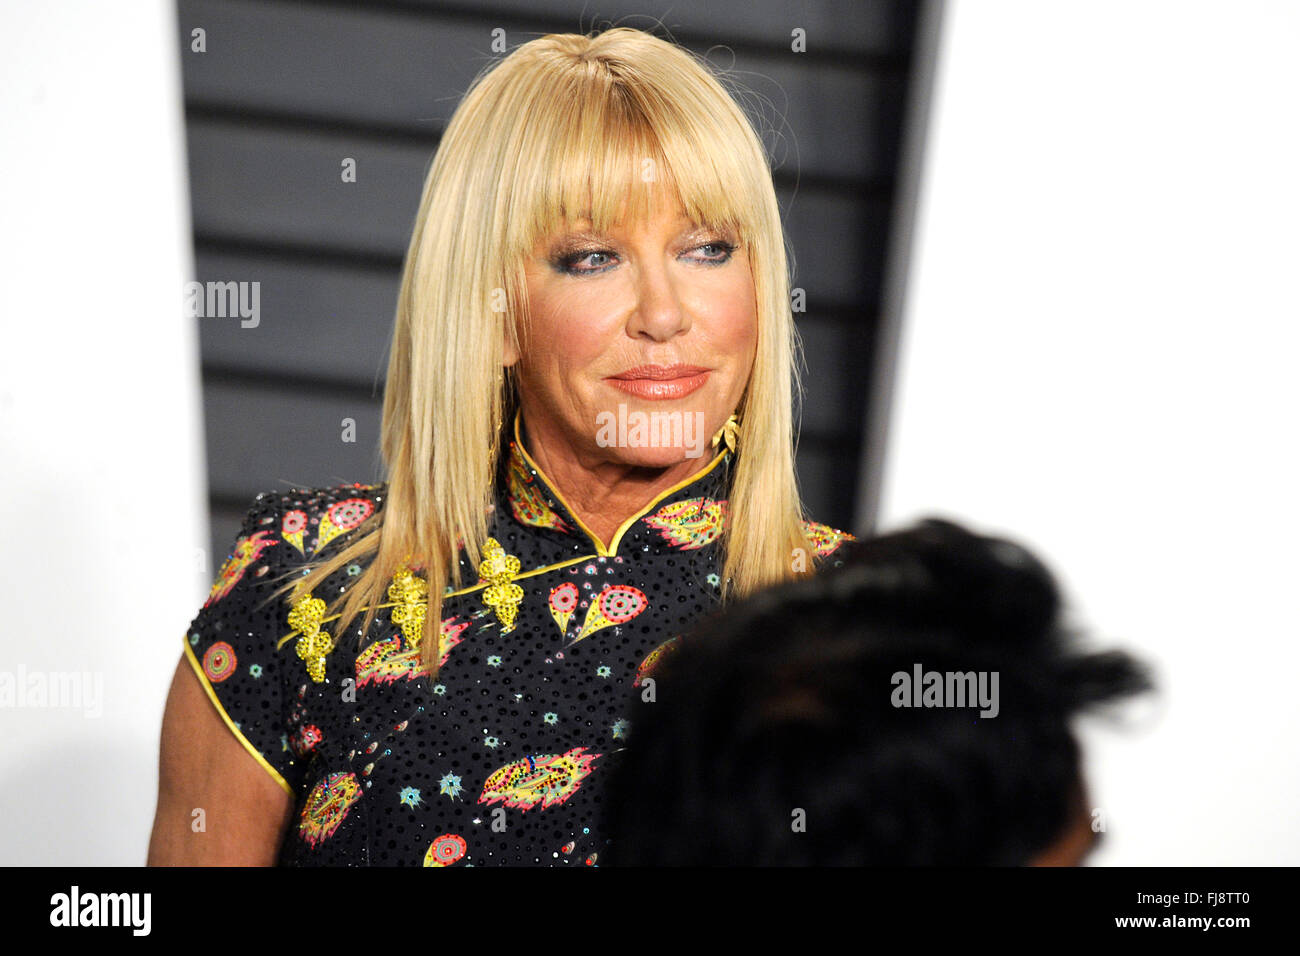 Beverly Hills, California. 28th Feb, 2016. Suzanne Somers attending the 2016 Vanity Fair Oscar Party Hosted By Graydon Carter at Wallis Annenberg Center for the Performing Arts on February 28, 2016 in Beverly Hills, California. © dpa/Alamy Live News Stock Photo